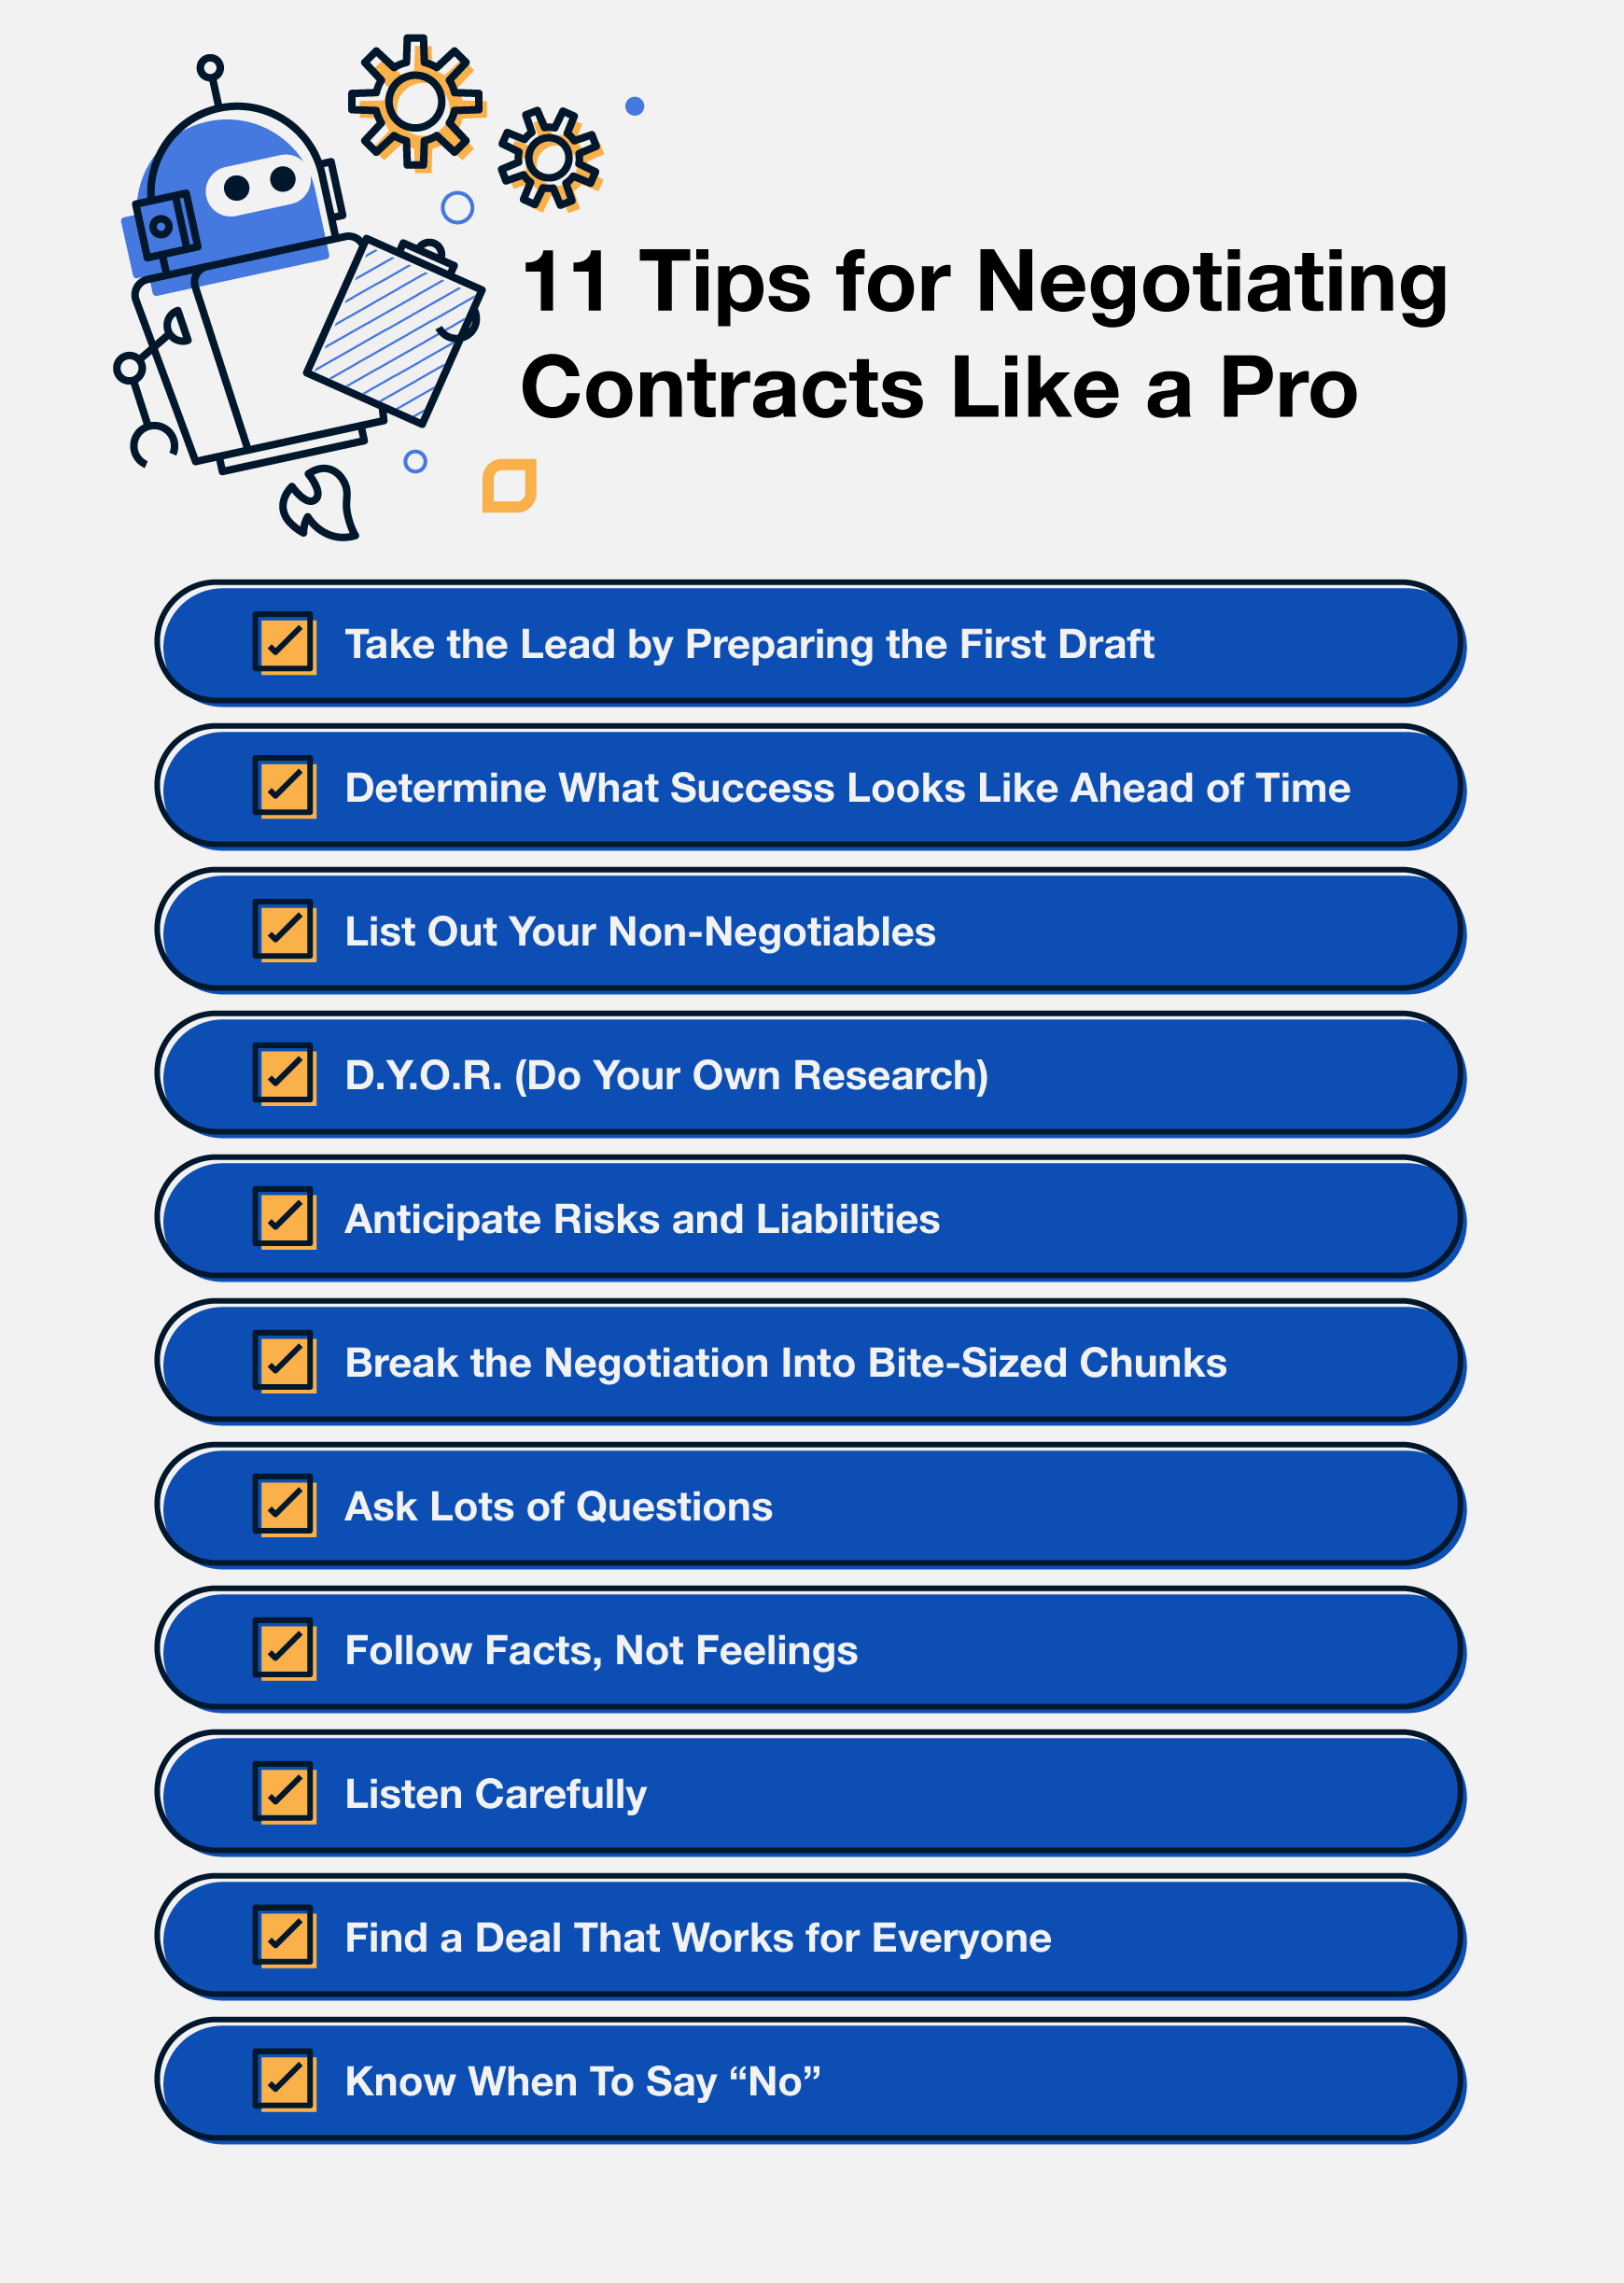 11-tips-for-negotiating-contracts-like-a-pro